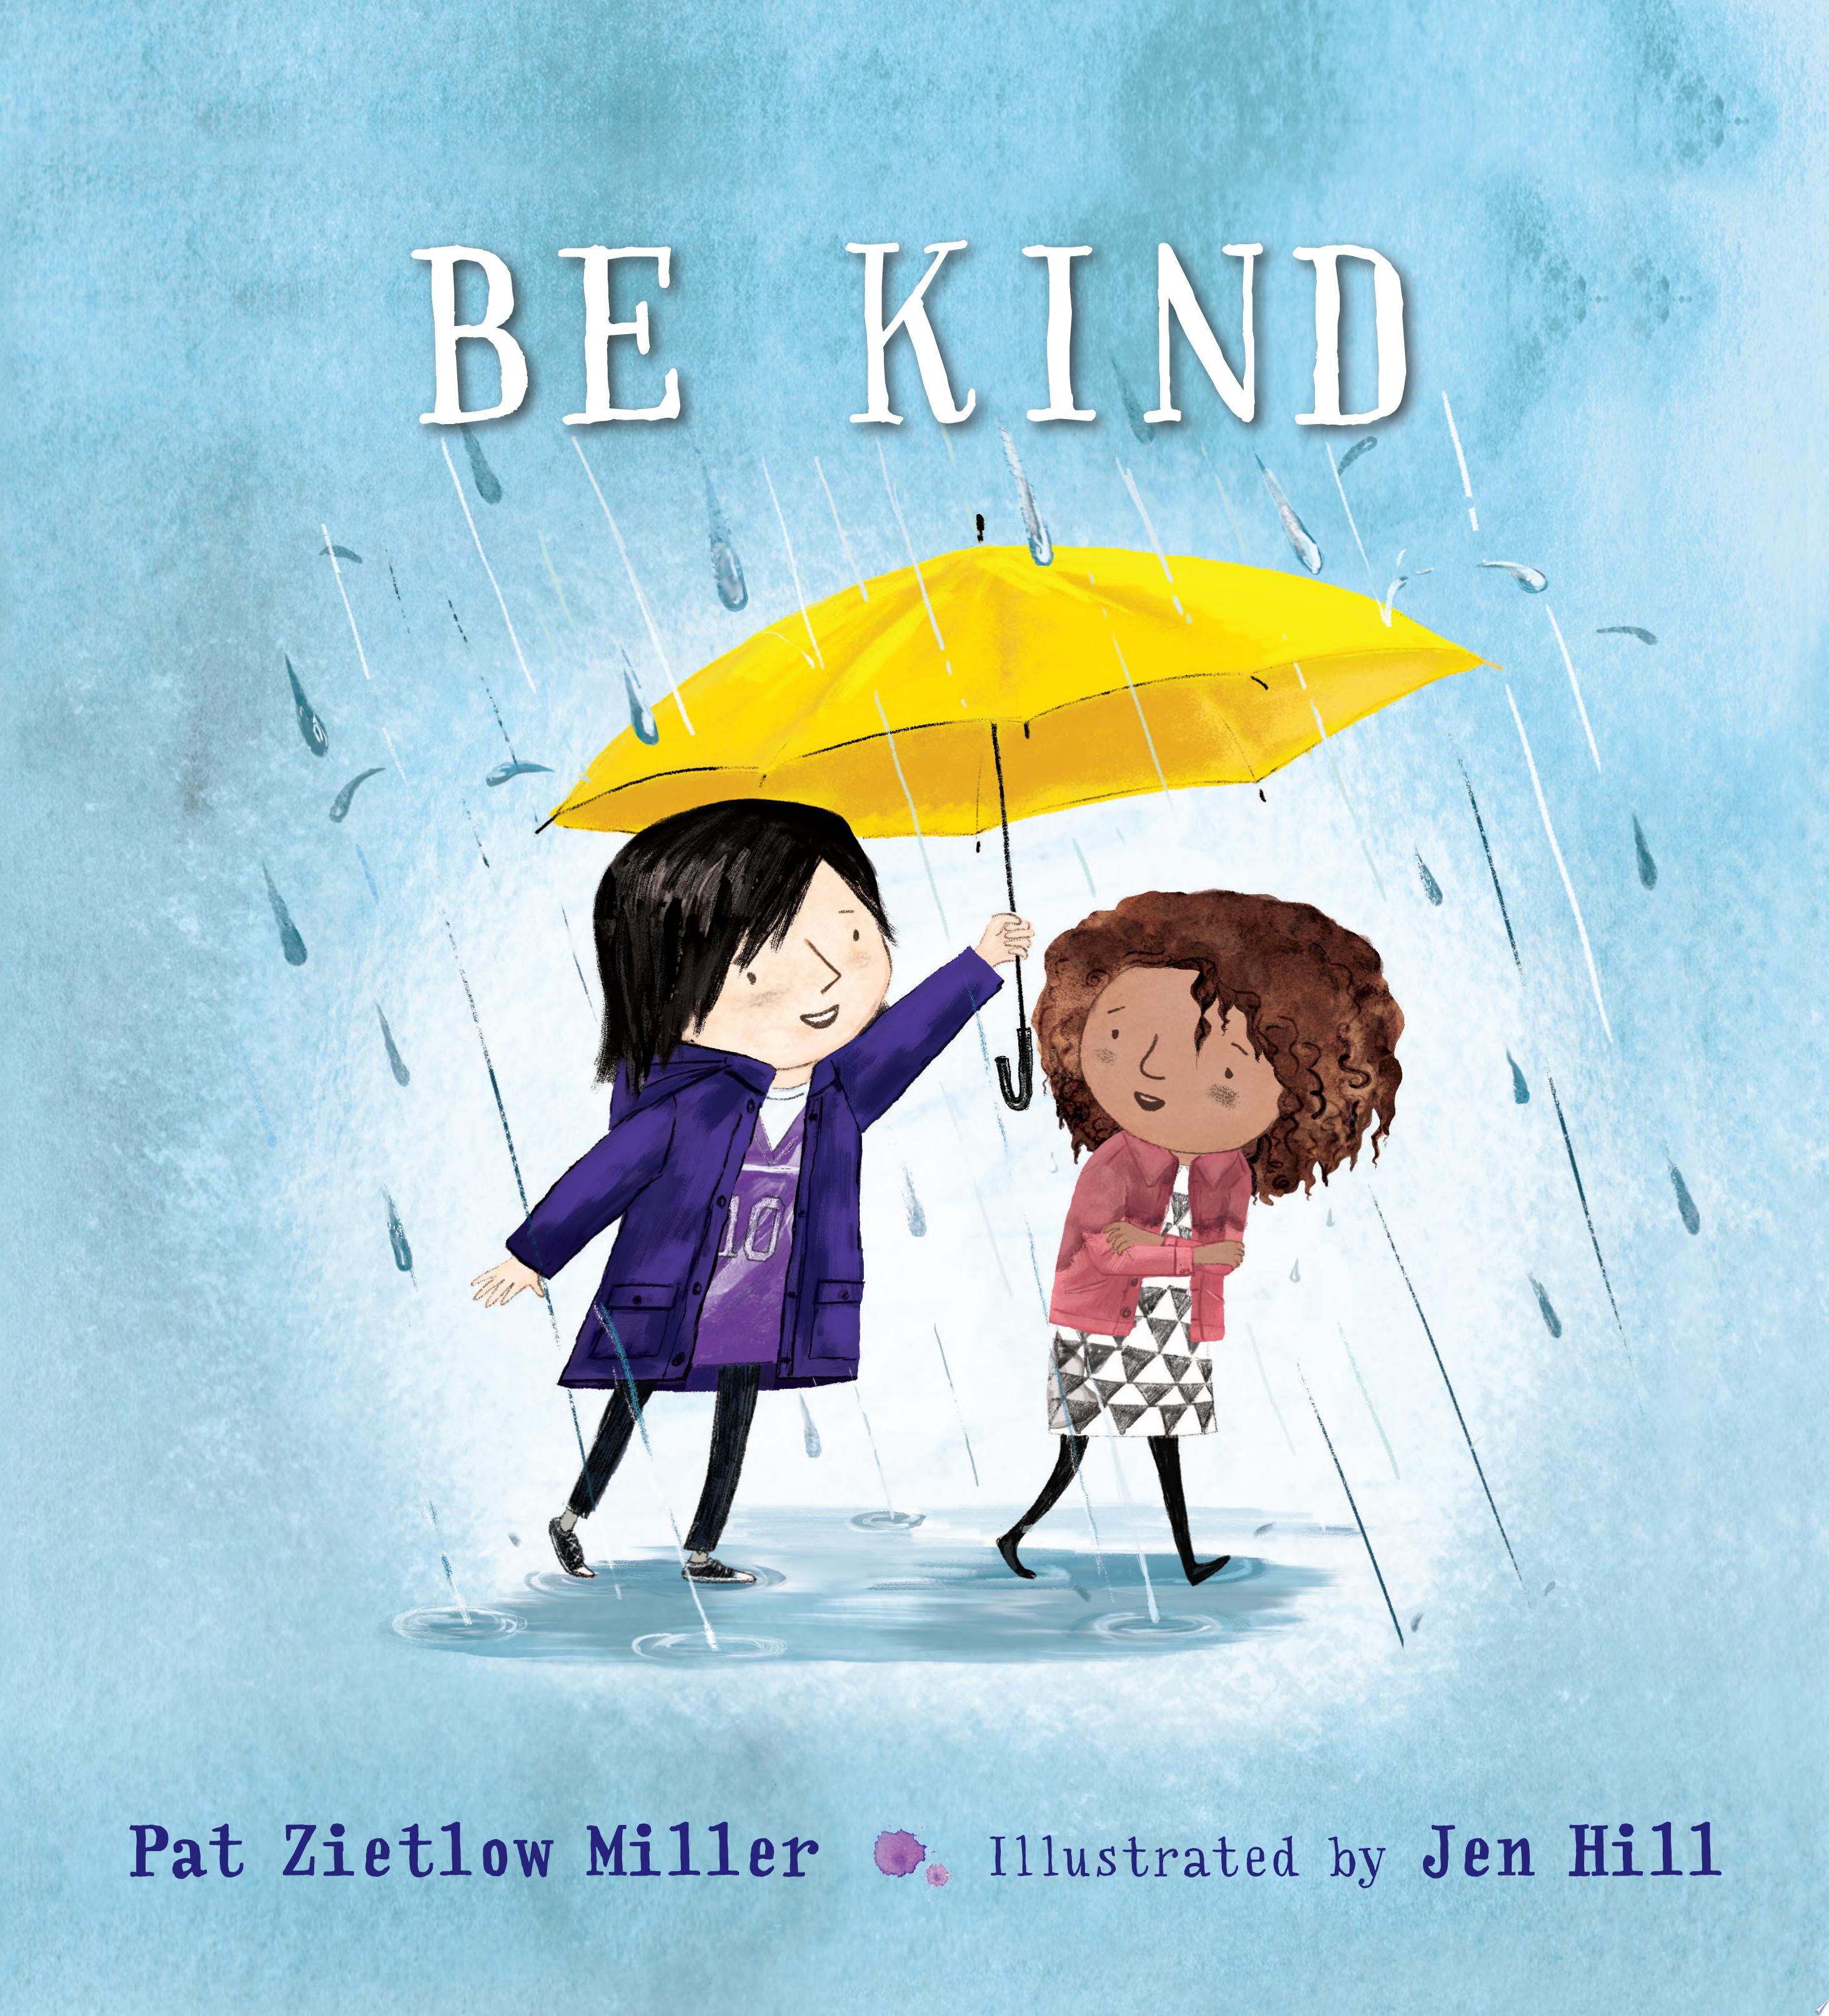 Image for "Be Kind"